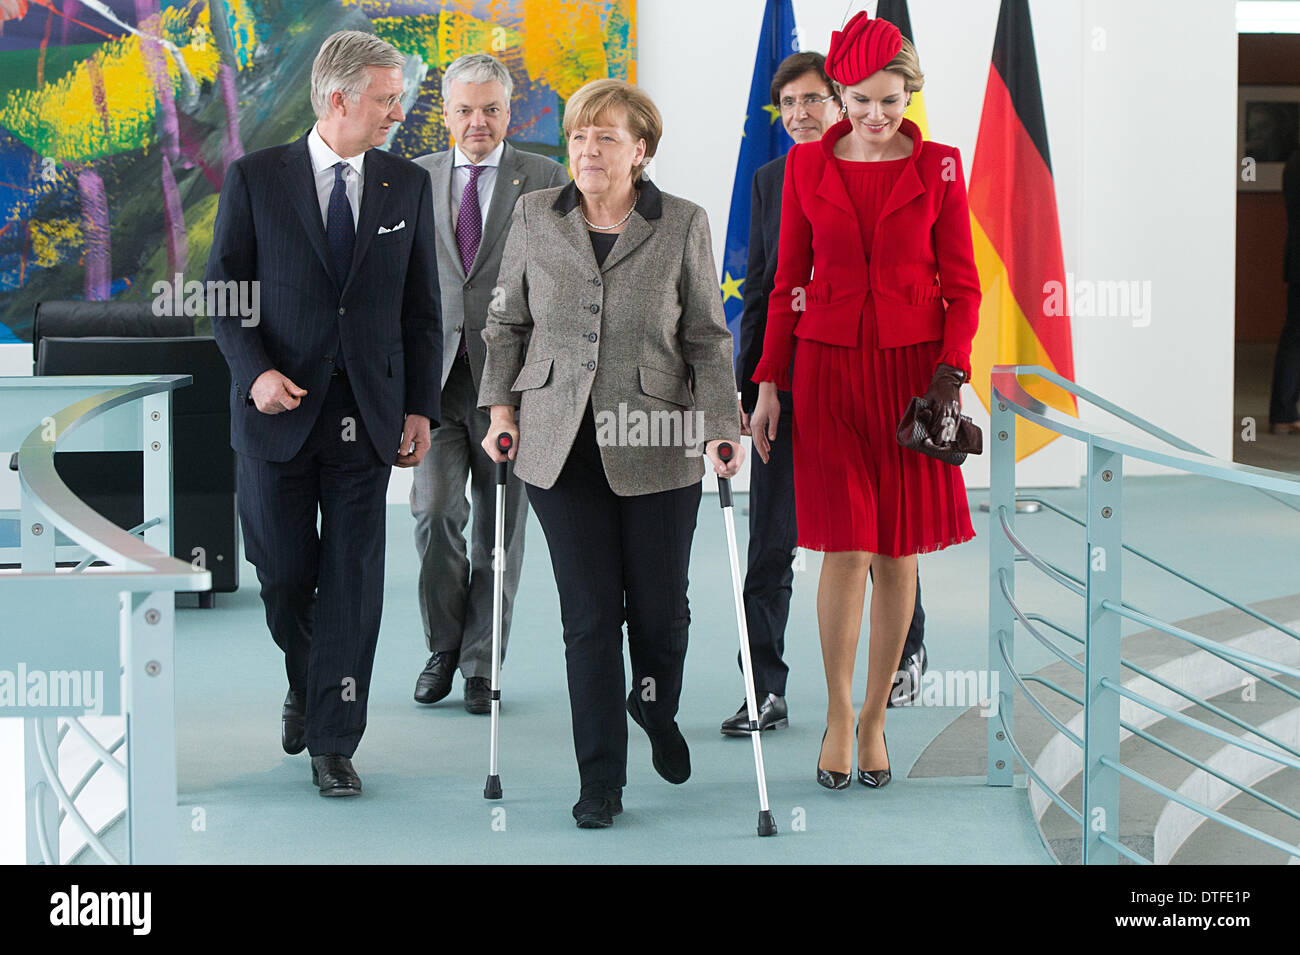 Berlin, Germany. 17th Feb, 2014. Belgium King Philippe (L) and his wife Queen Mathilde (R), Belgium Prime Minister Elio Di Rupo (2-R) and Belgium Foreign Mininster Didier Reynders (2-L) are welcomed by German Chancellor Angela Merkel (CDU, C) during Philippes's inaugutal visit in Berlin, Germany, 17 February 2014. It is King Philippe's first visit of Germany after he succeeded his father Albert II as King of the Belgians in July 2013. Photo: Maurizio Gambarini/dpa/Alamy Live News Stock Photo